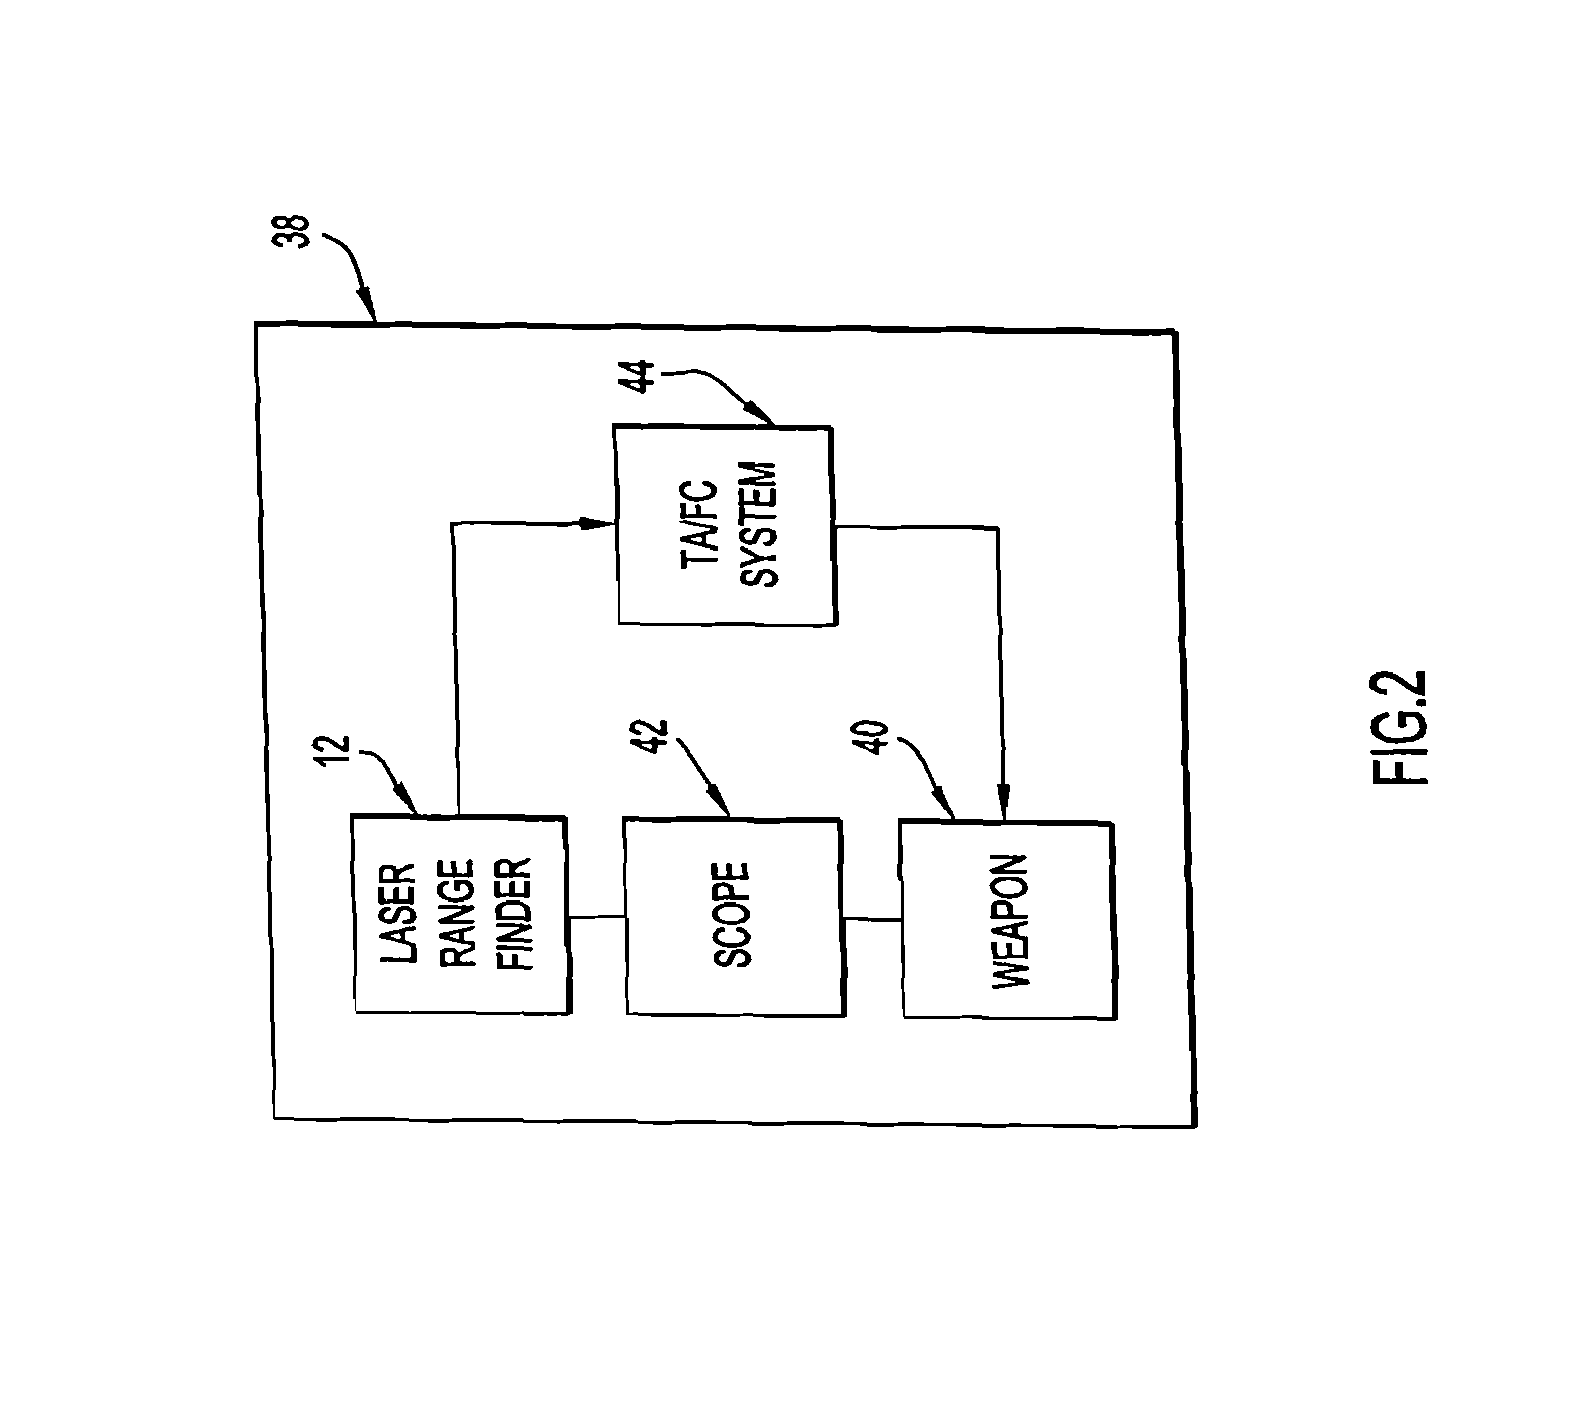 Systems and methods for automatic target tracking and beam steering